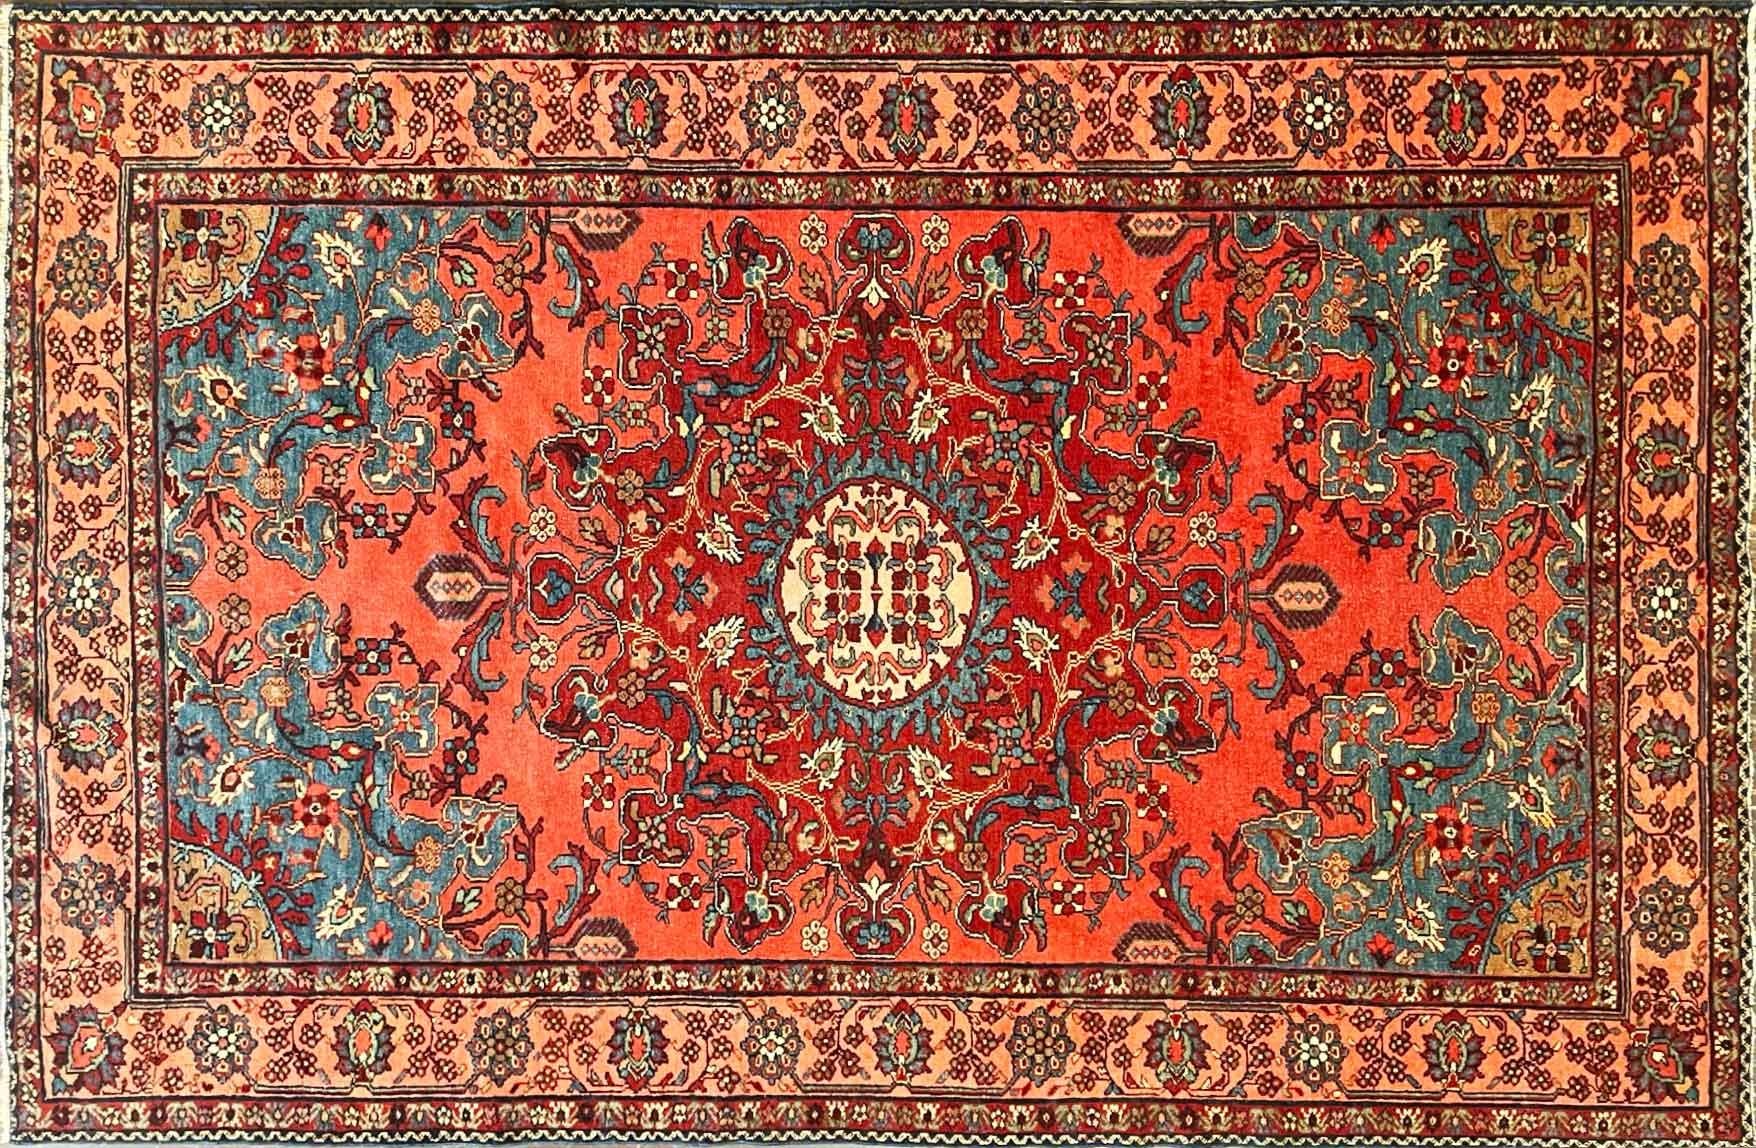 Beautiful colors with fine quality, circa 1920. Handwoven Lilihan rug. Produced south of the city of Arak by Armenians in Persia, Lilihan rugs are known for their design. Traditionally designed with a curvilinear lattice with traditional floral